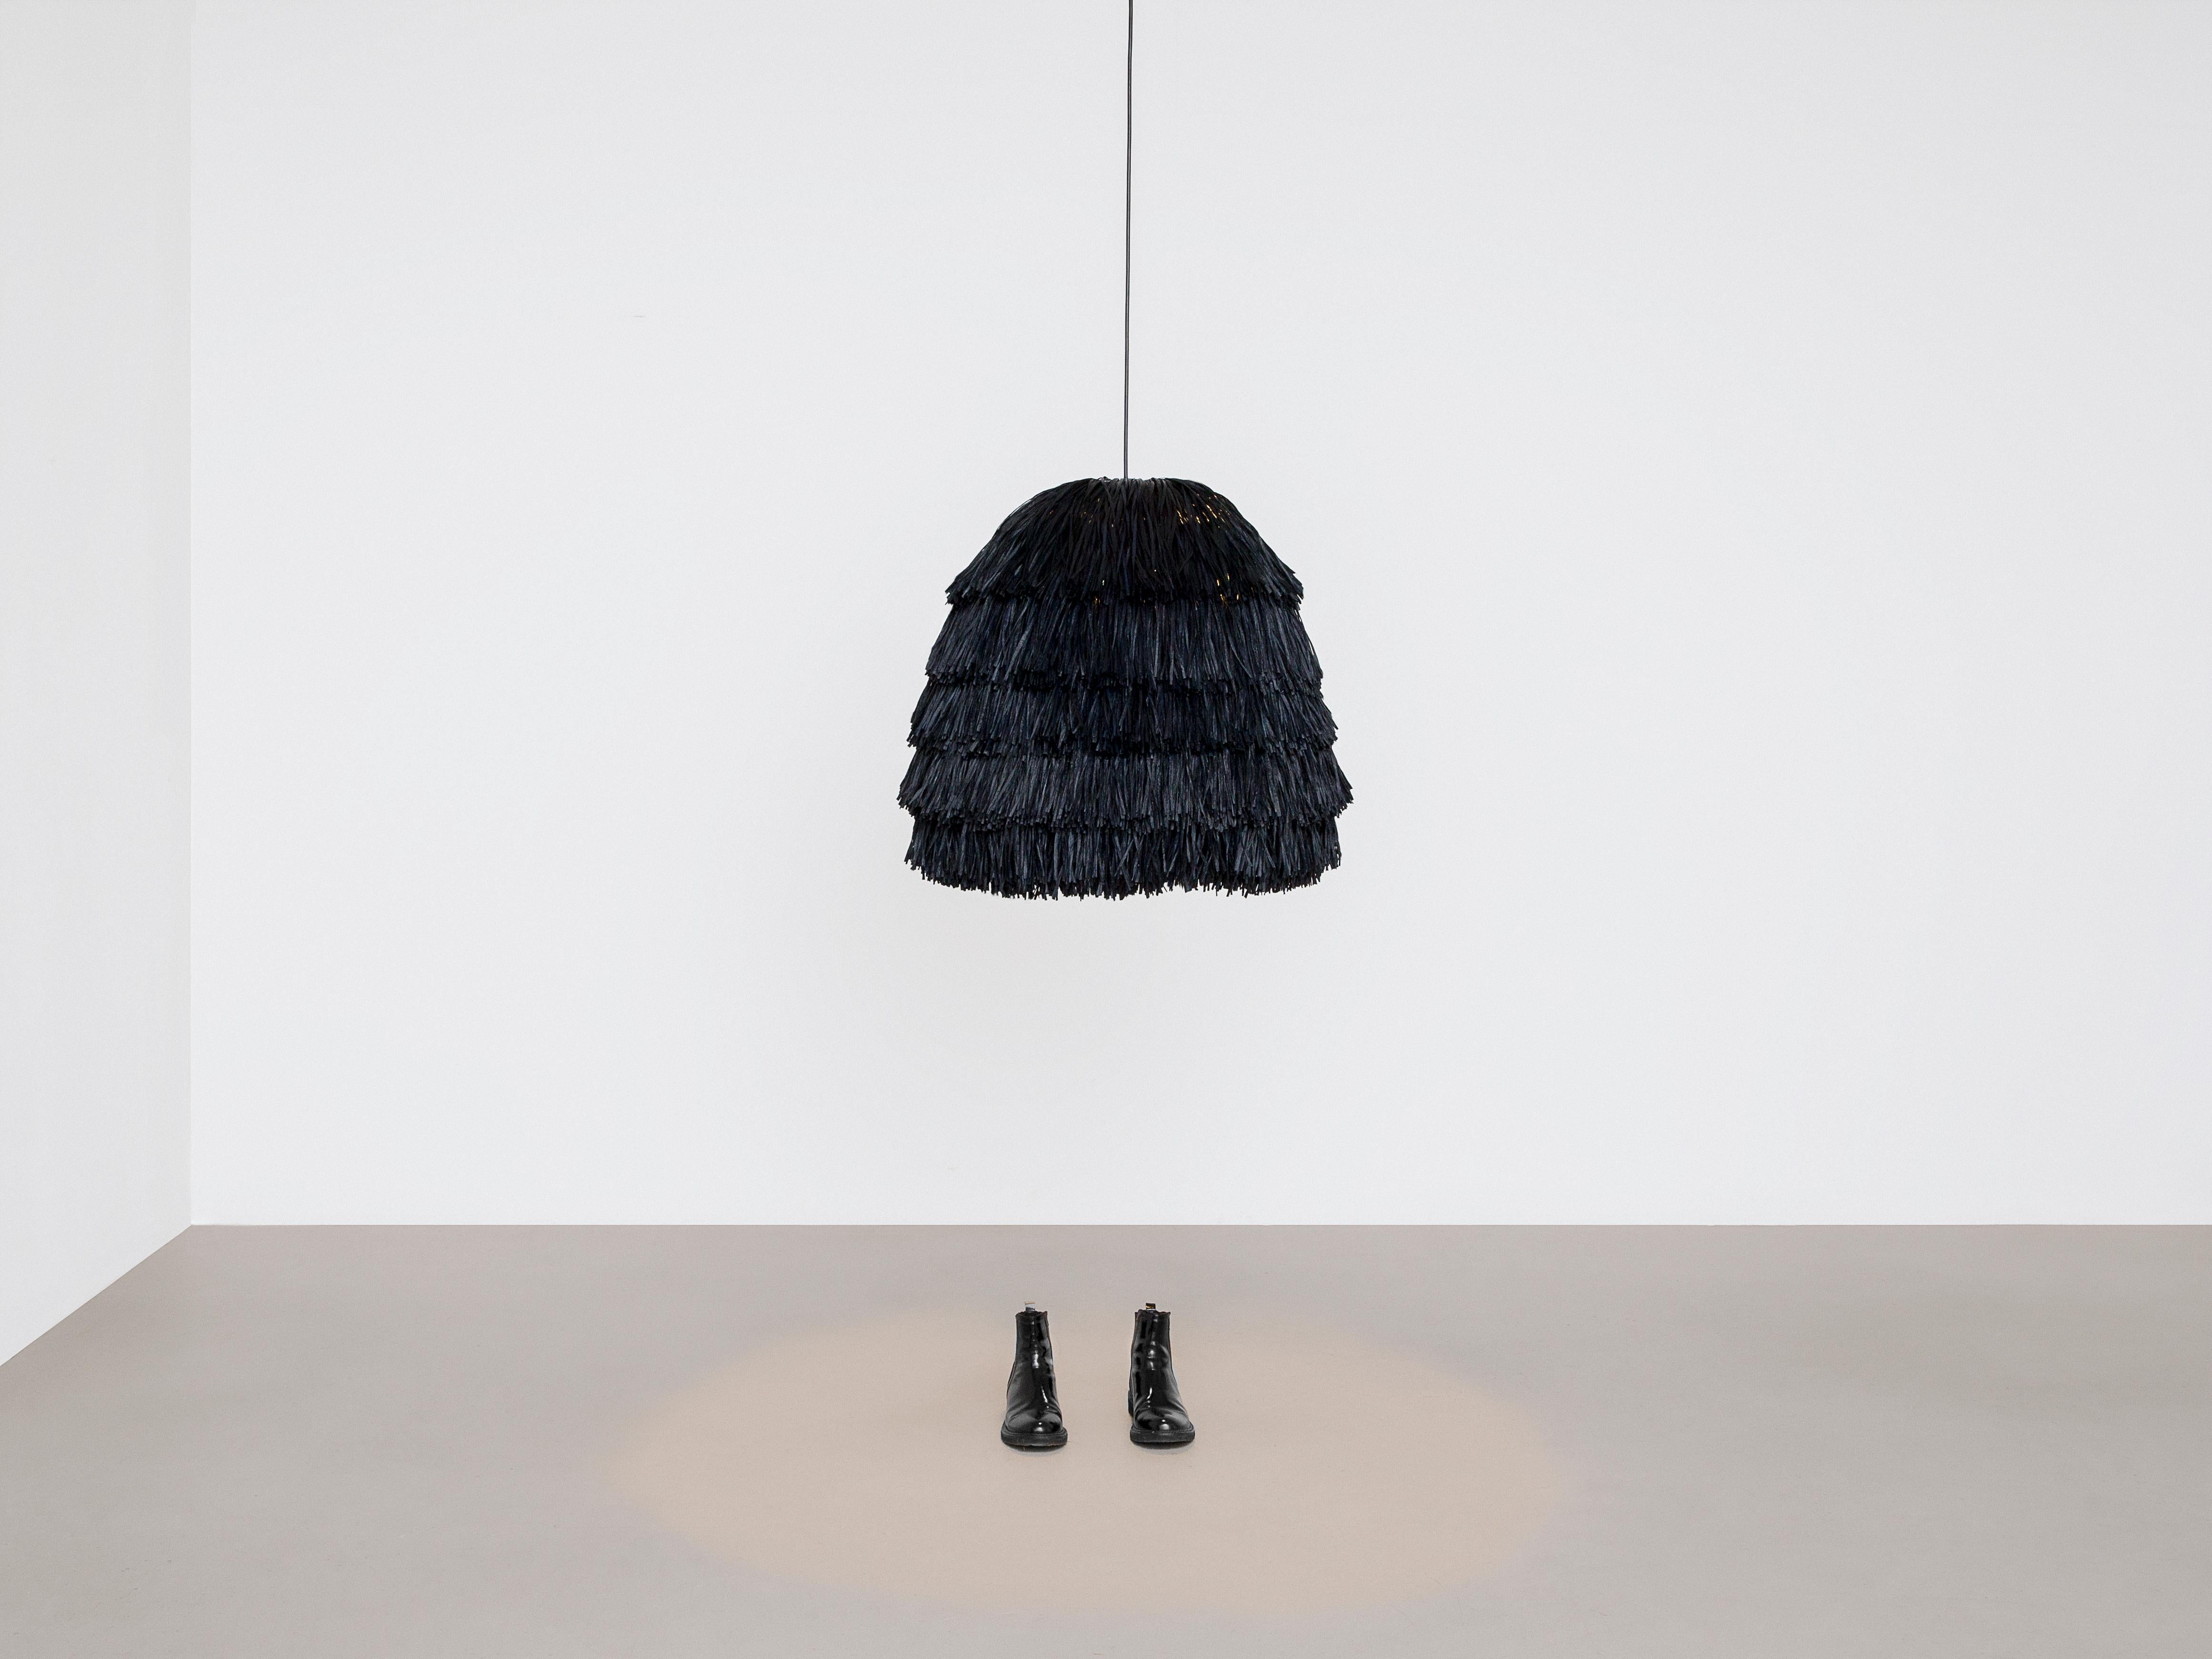 Green Fran XL lamp by Llot Llov
Handcrafted light object
Dimensions: Ø 40 cm x H 35 cm
Materials: raffia fringes
Also available in green, red, black, beige 

With their bulky silhouette and rustling fringes, the FRAN lights are reminiscent of